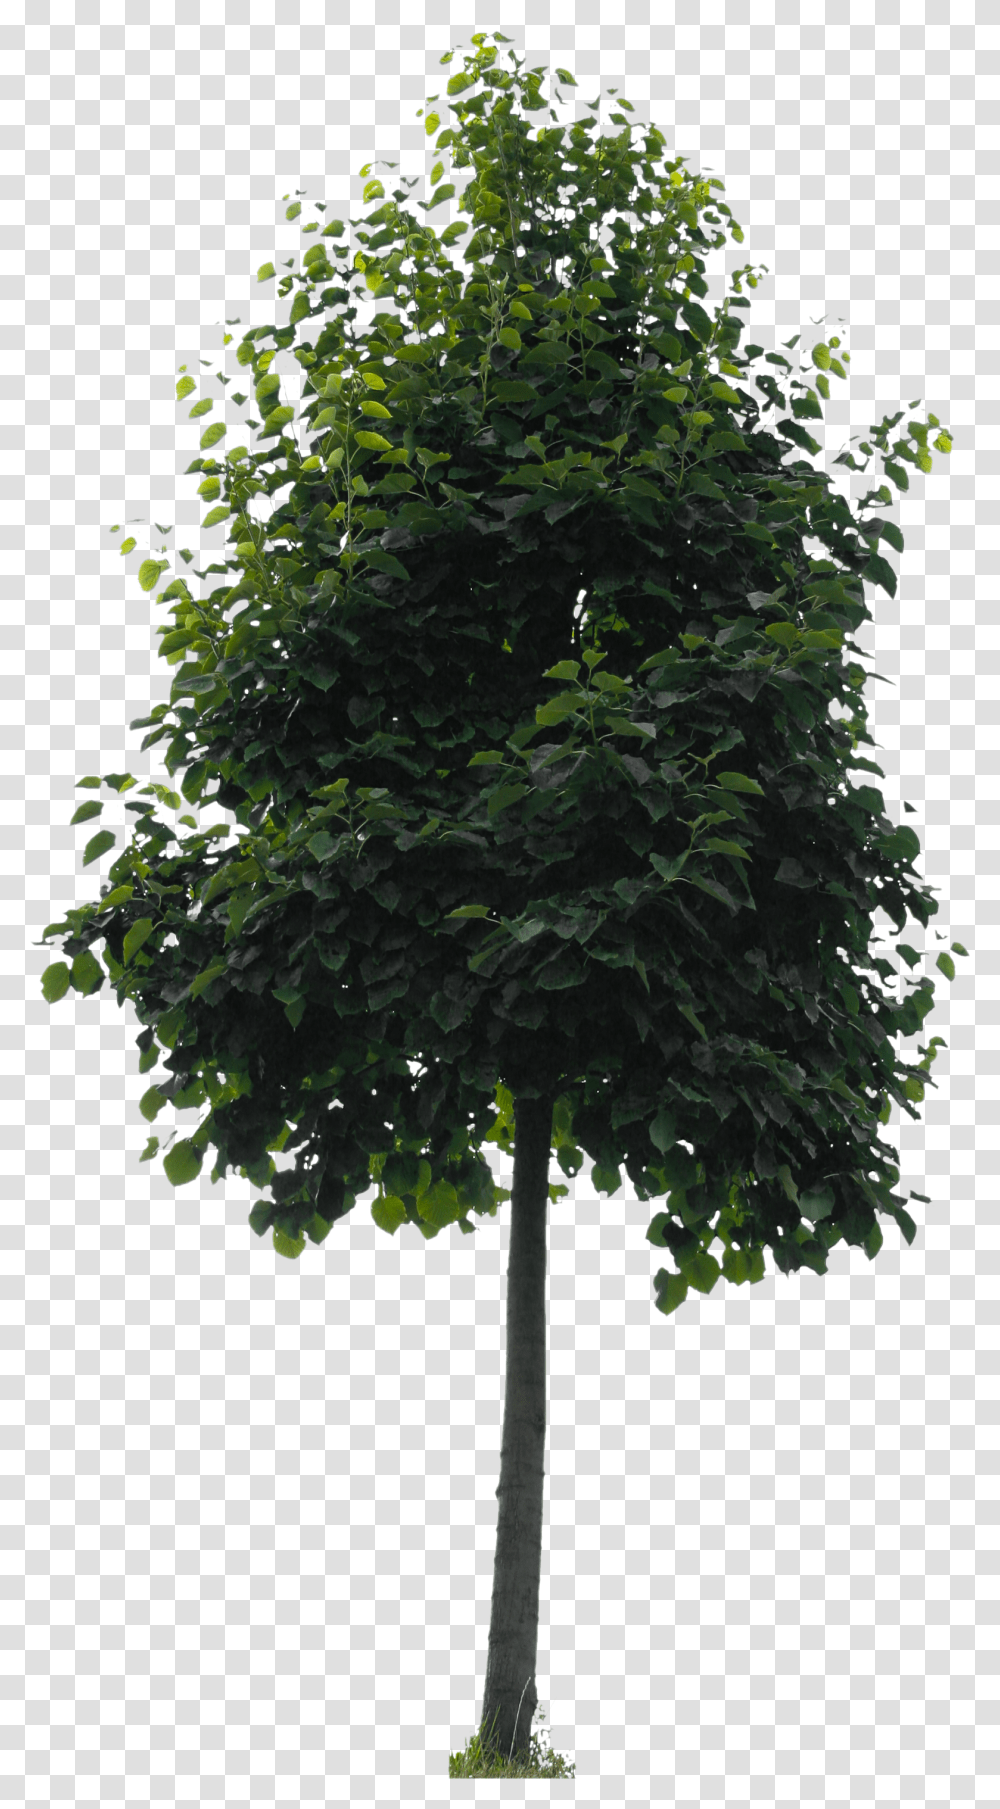 Small City Tree Free Cut Out People Trees And Leaves, Plant, Fir, Tree Trunk, Conifer Transparent Png